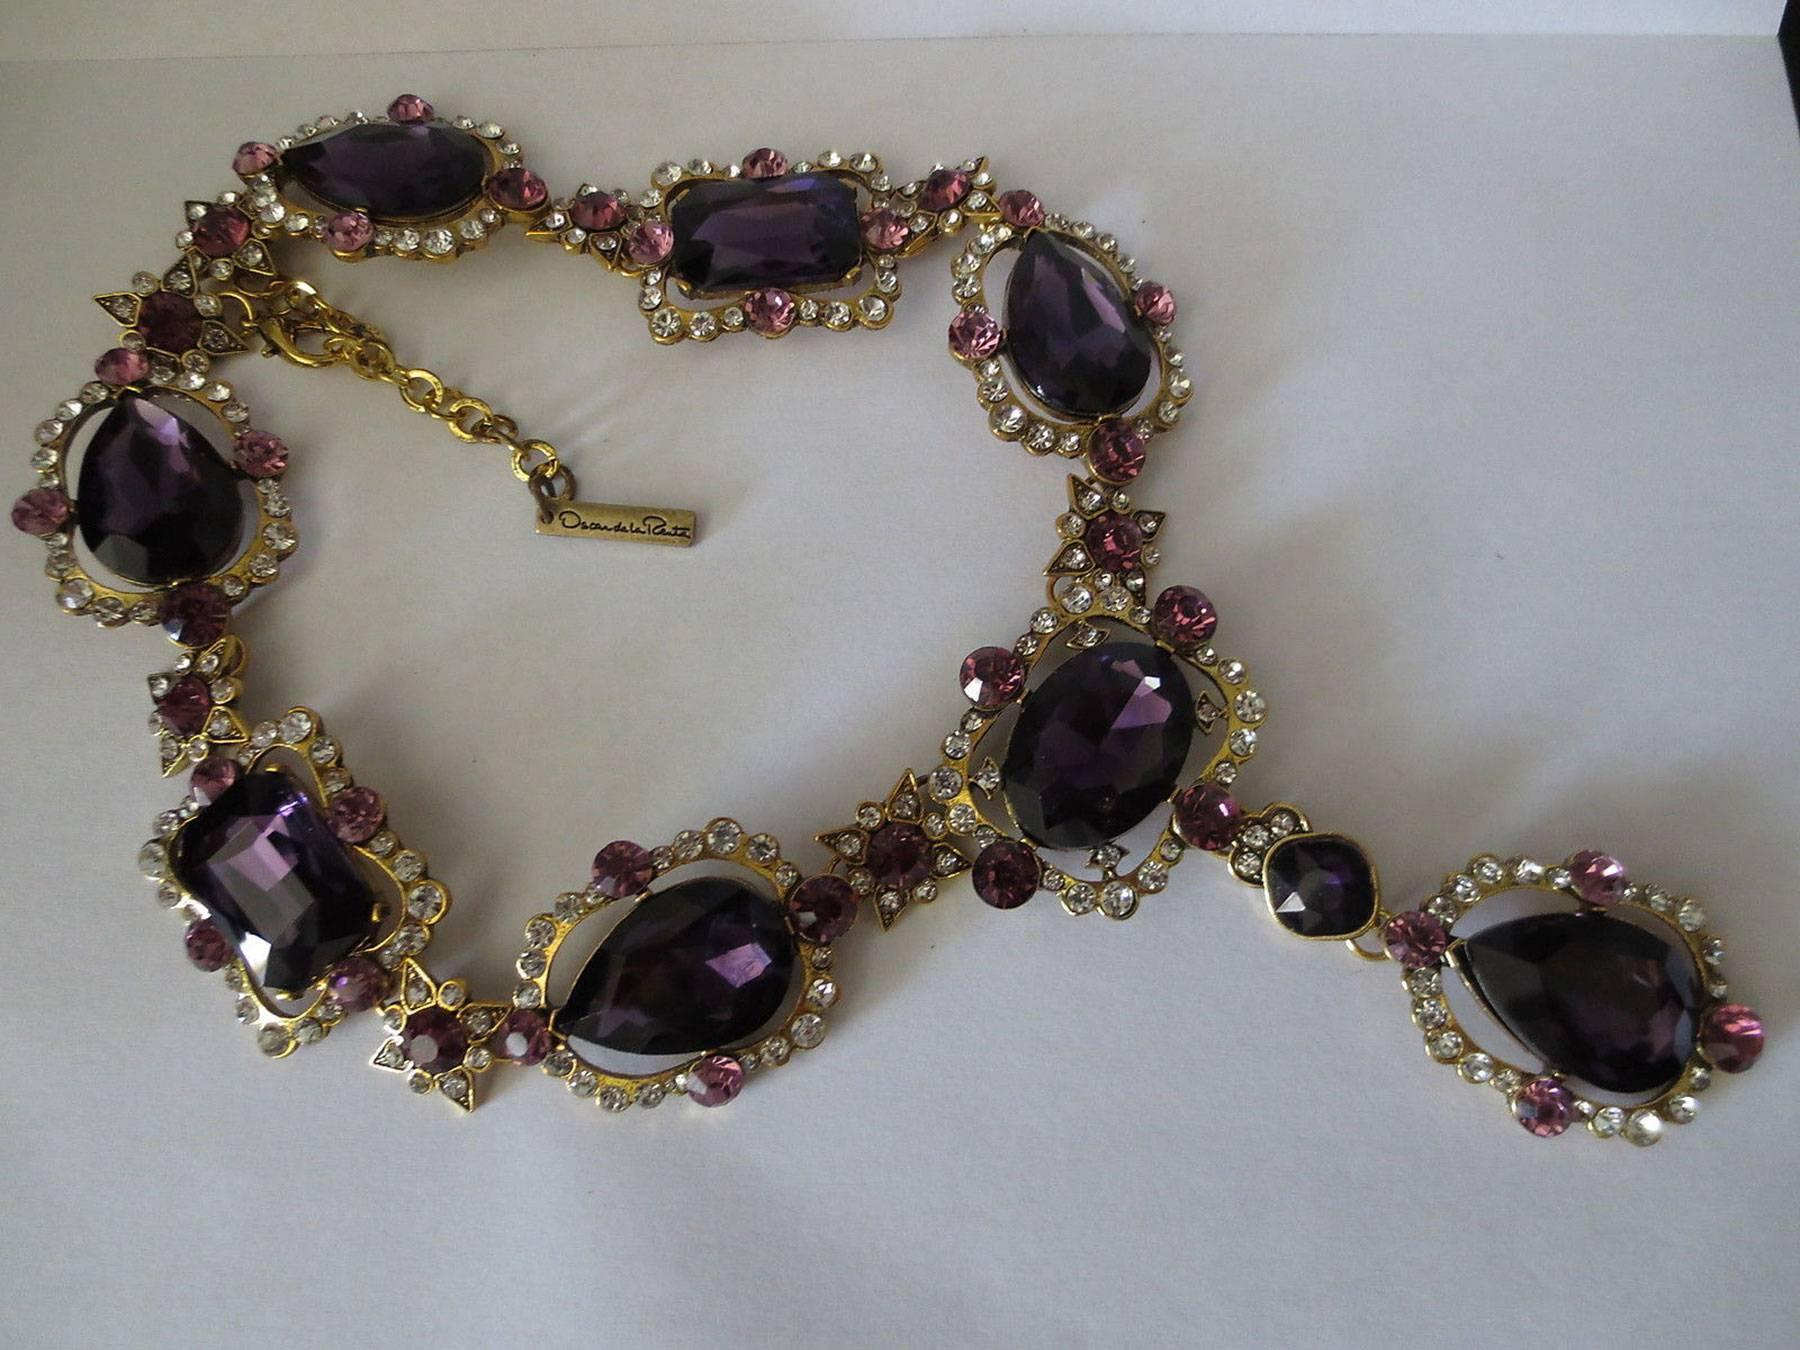 Stunning signed Oscar de la Renta Runway Chunky Necklace set with Faux Amethyst crystal and sparkling clear Rhinestones; Beautifully crafted! approx. 20 inches long with massive center drop approx. 5” long; adjustable chain; Awesome and Fabulous as